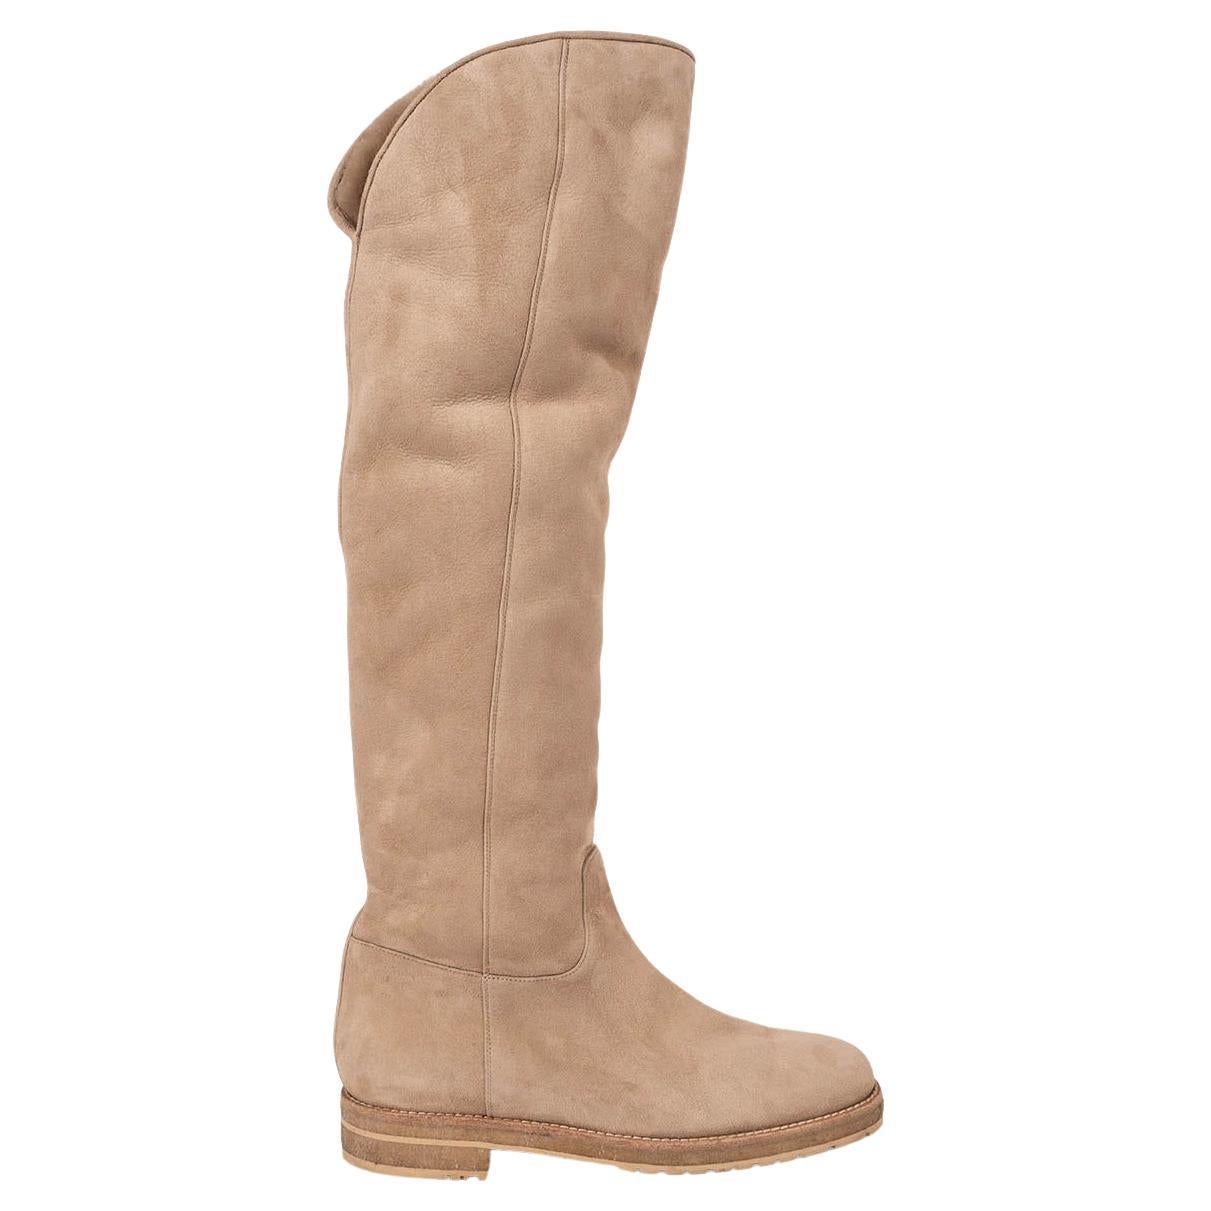 LORO PIANA beige SHEARLING LINED SUEDE OVER KNEE Boots Shoes 41 en vente